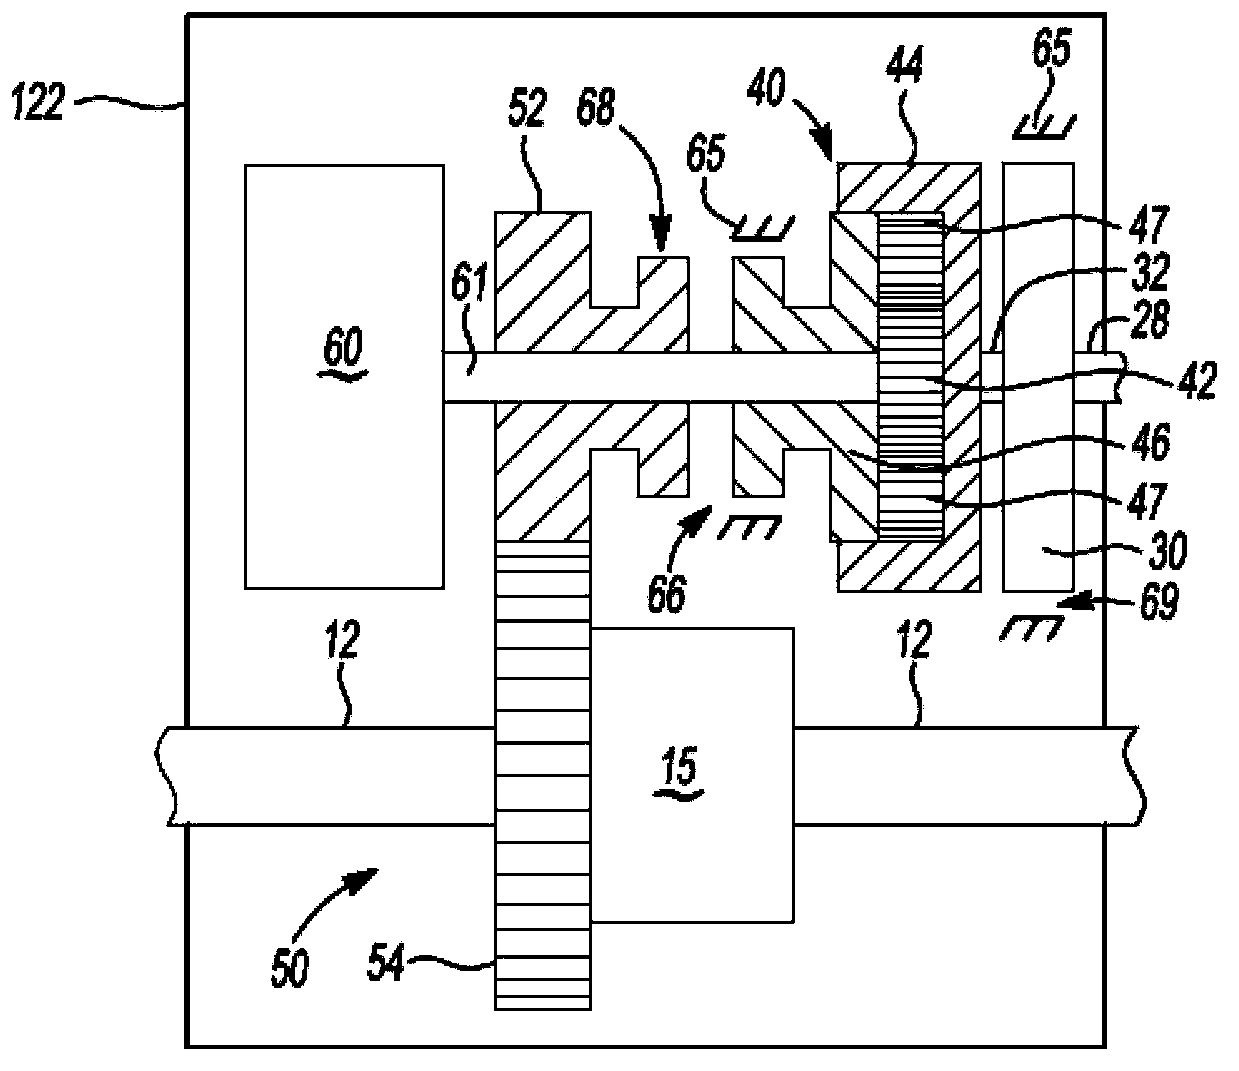 Hybrid vehicle with electric transmission and electric drive module